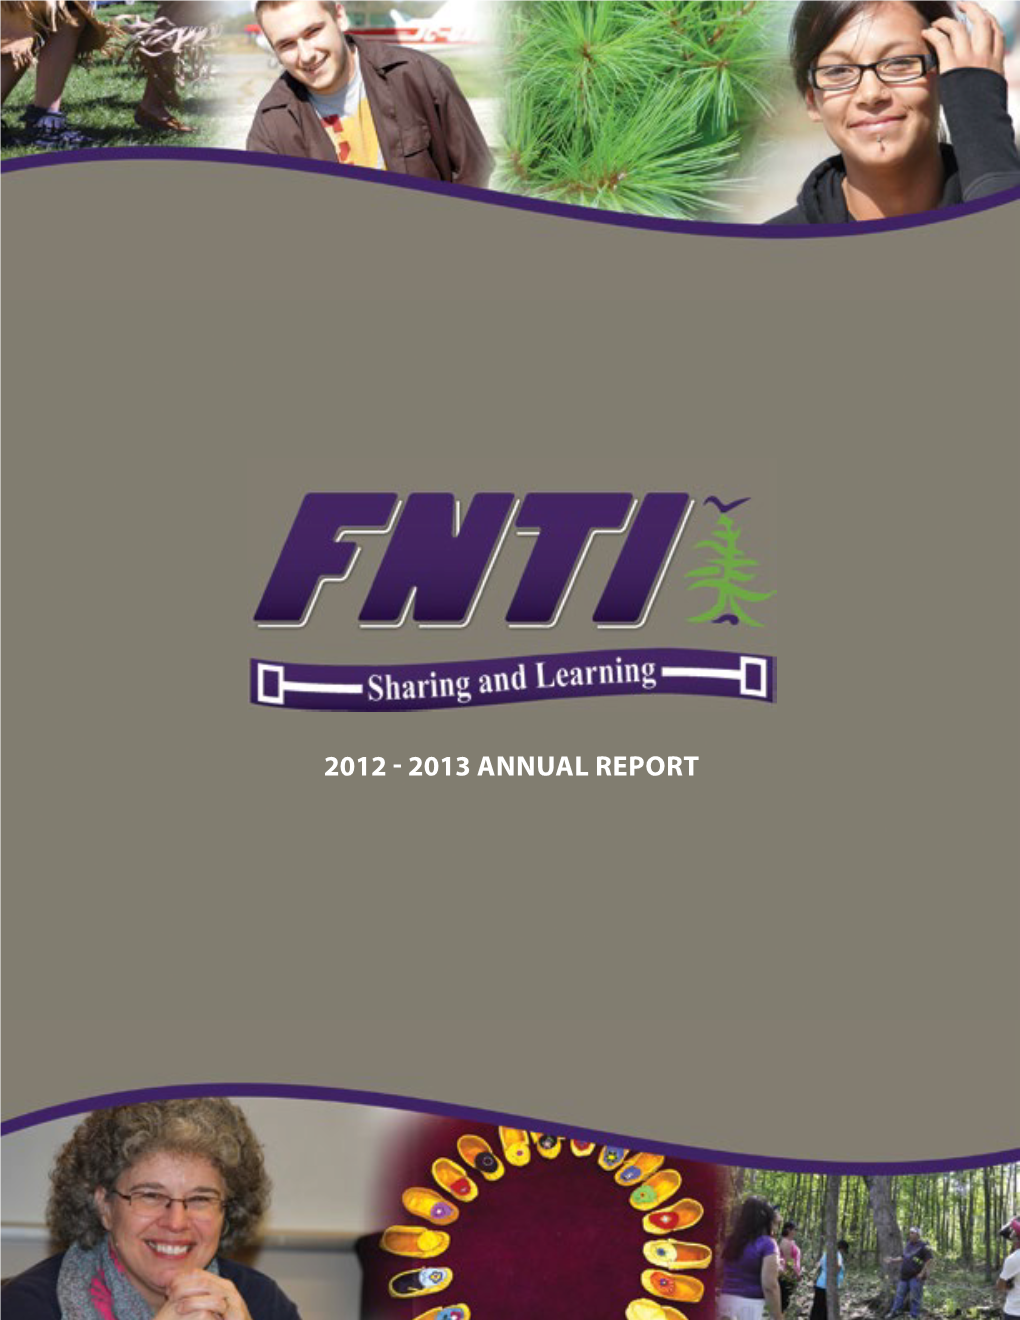 2013 Annual Report Table of Contents